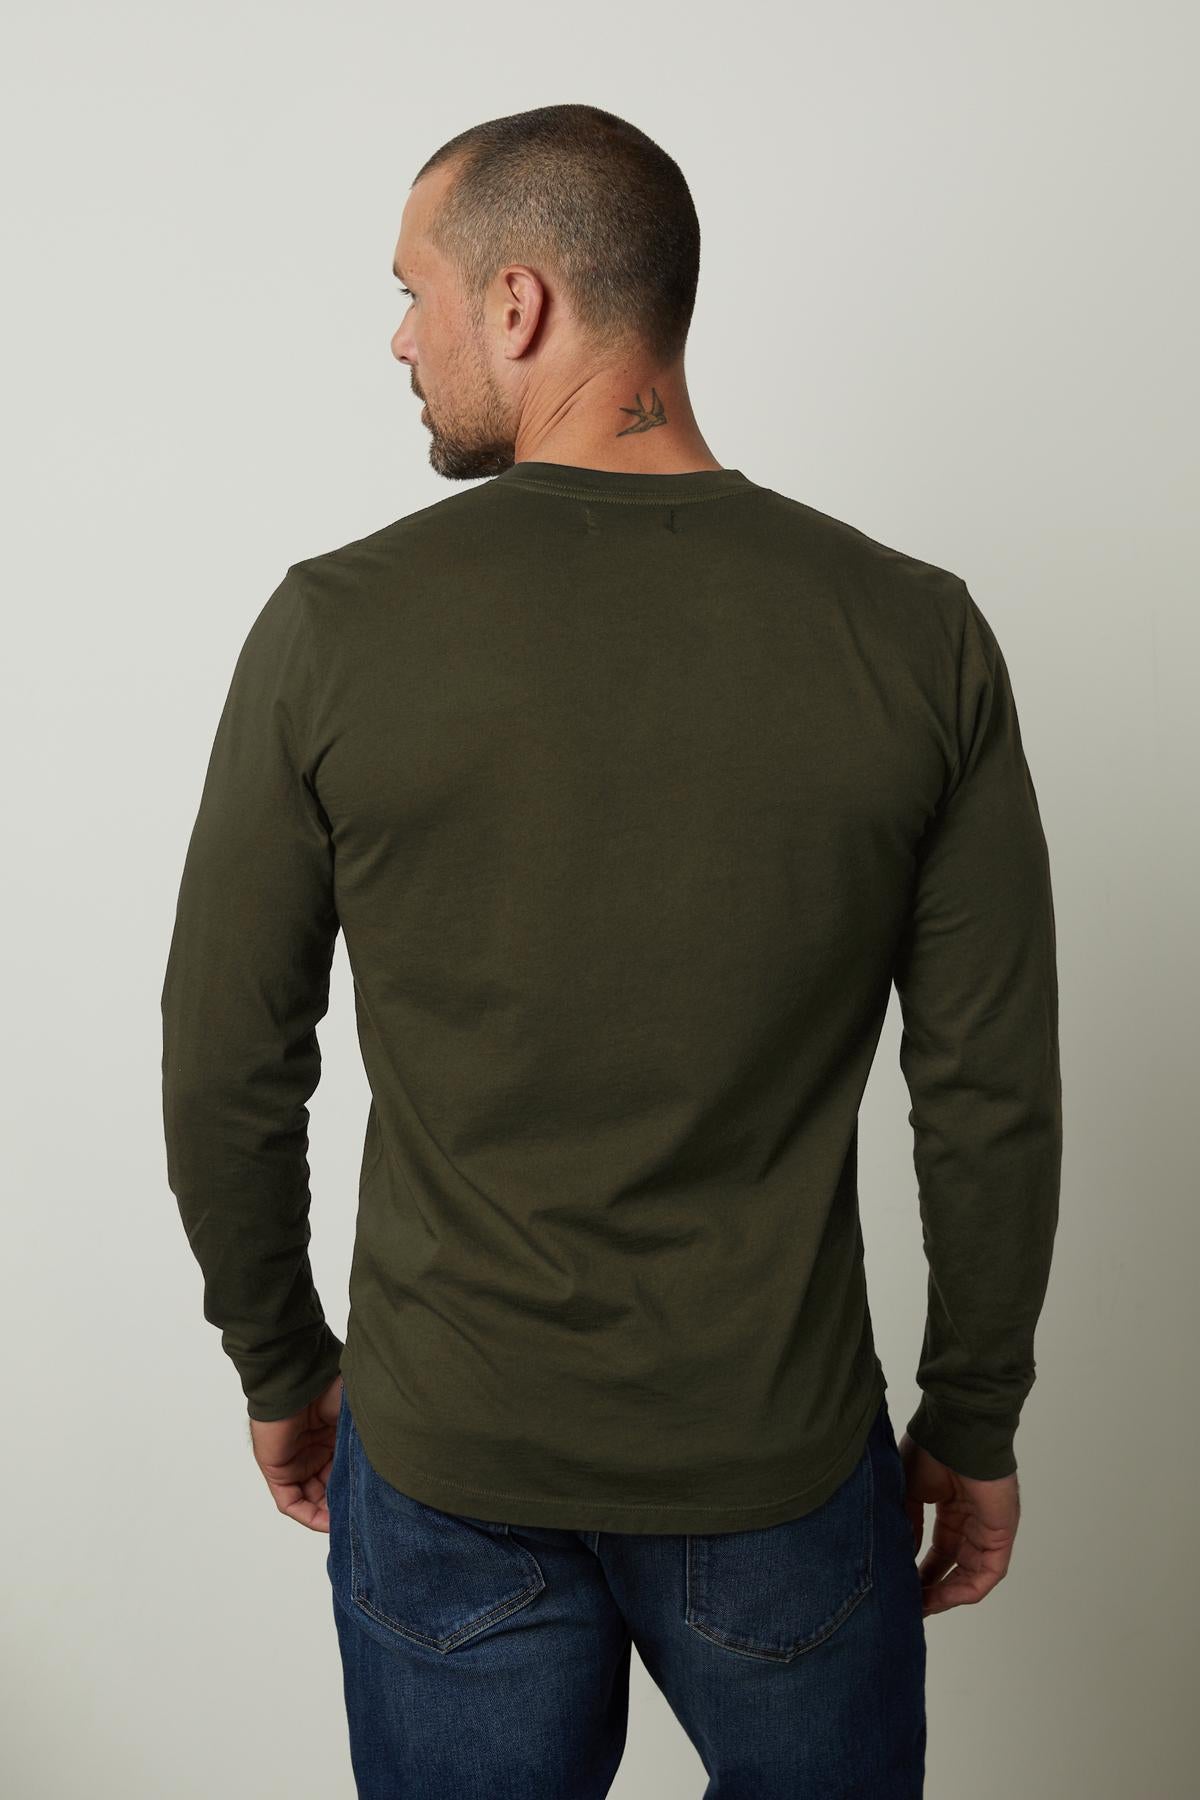   The back view of a man wearing a Velvet by Graham & Spencer lightweight green long sleeve t-shirt made of cotton fabric, called the BRADEN HENLEY. 